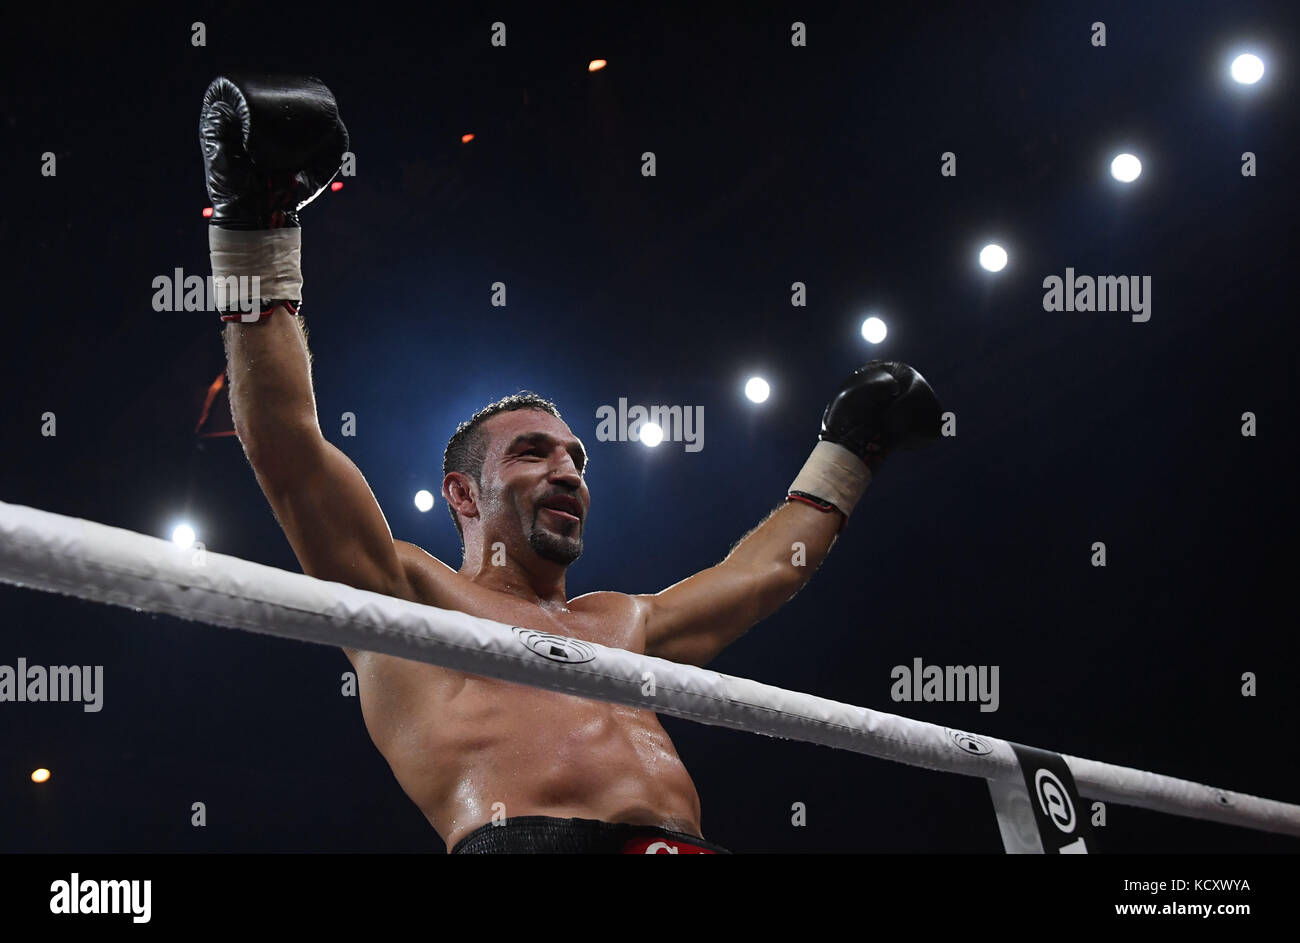 Stuttgart, Germany. 7th Oct, 2017. Firat Arslan celebrates his victory in the professional boxing match between Arslan from Germany and Valori from Argentina in Stuttgart, Germany, 7 October 2017. Credit: Marijan Murat/dpa/Alamy Live News Stock Photo